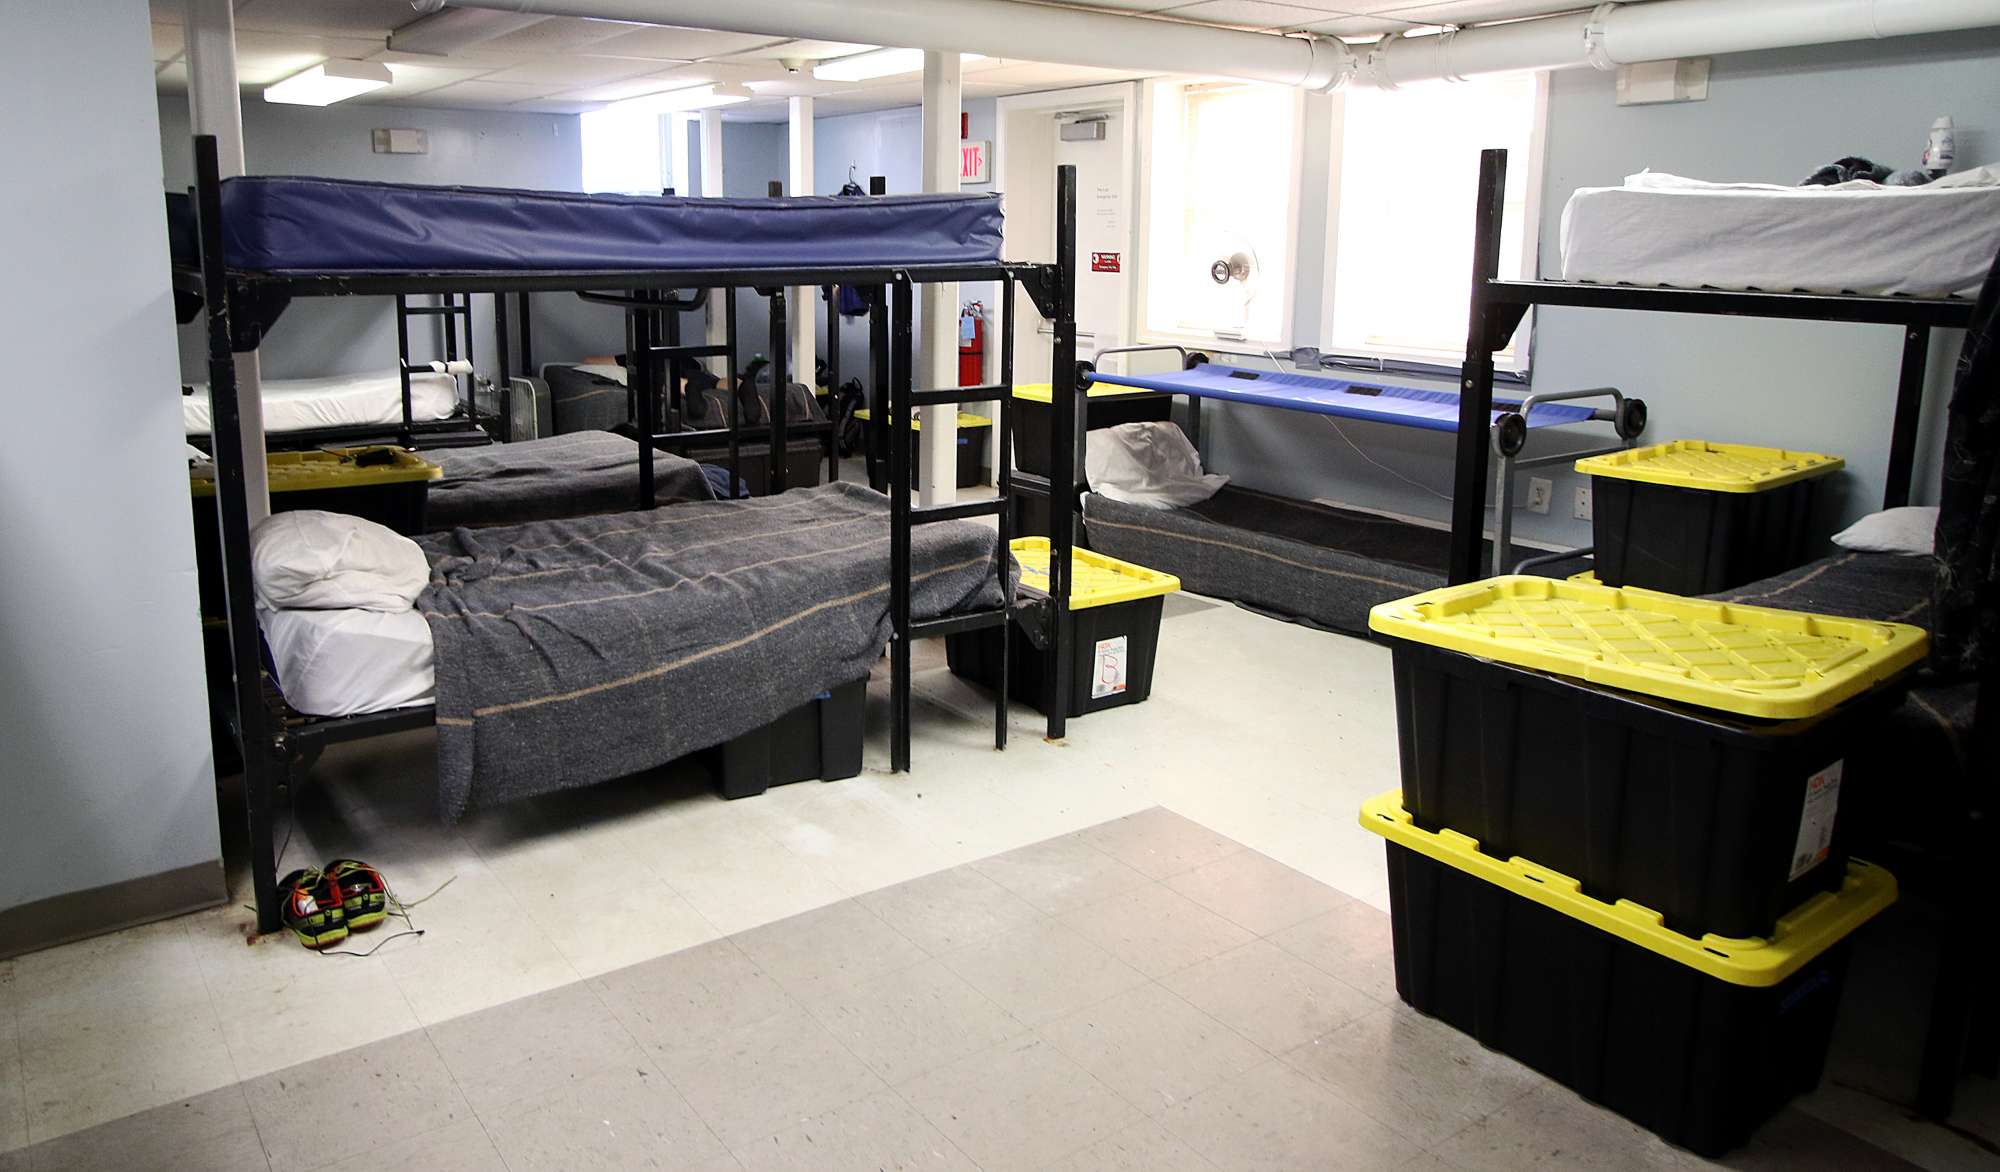 Donating To Lifebridge During The Fall, Donate Bunk Beds